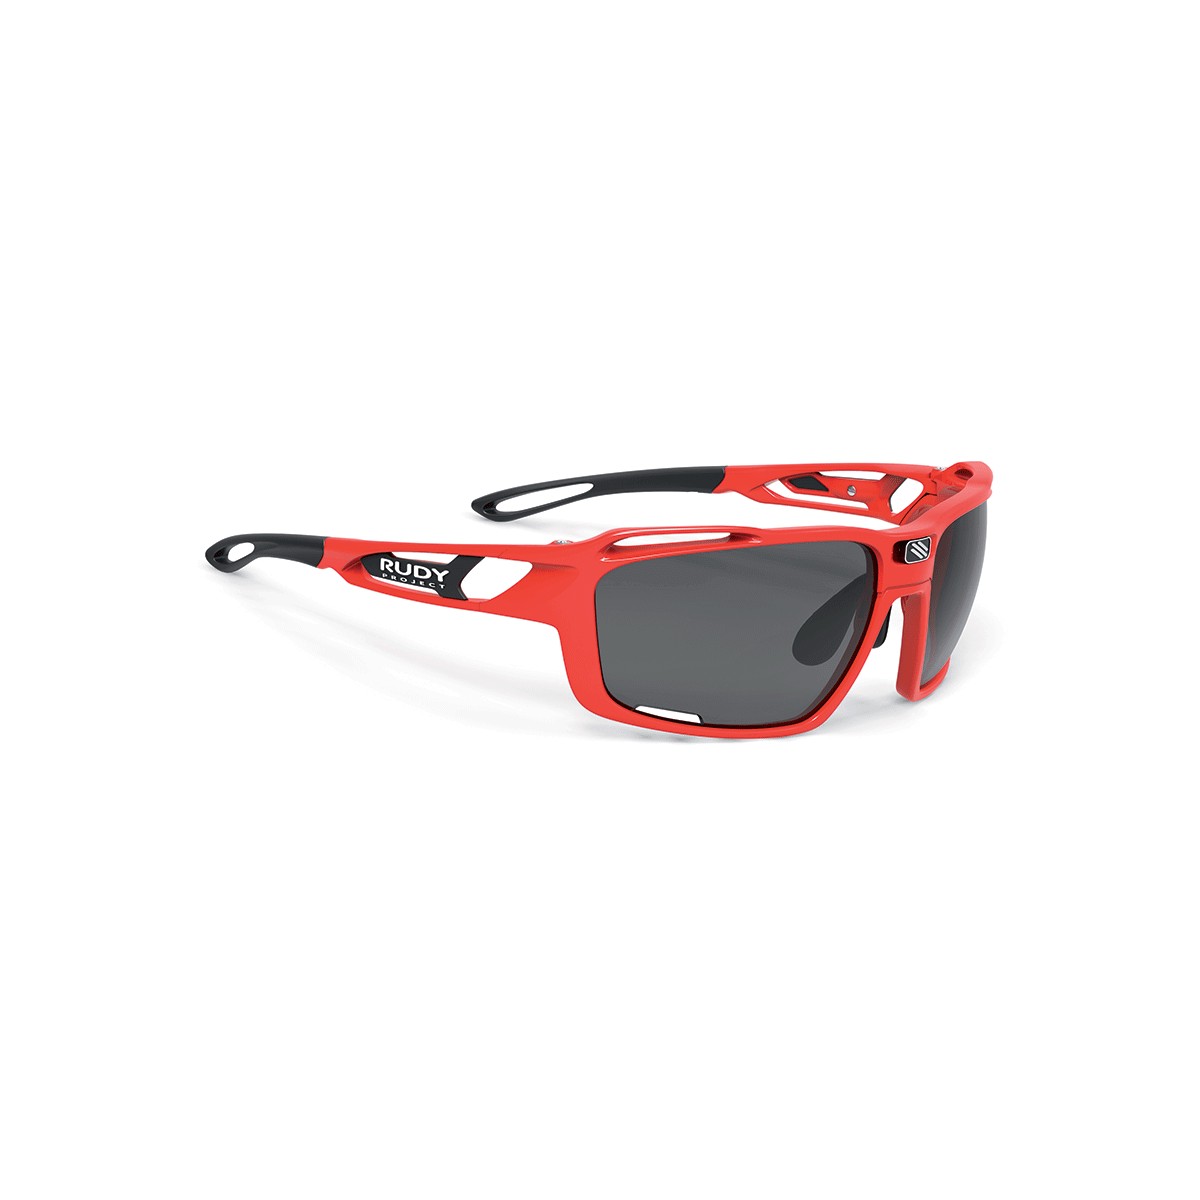 Rudy Project Sintryx Fire red smoke glasses